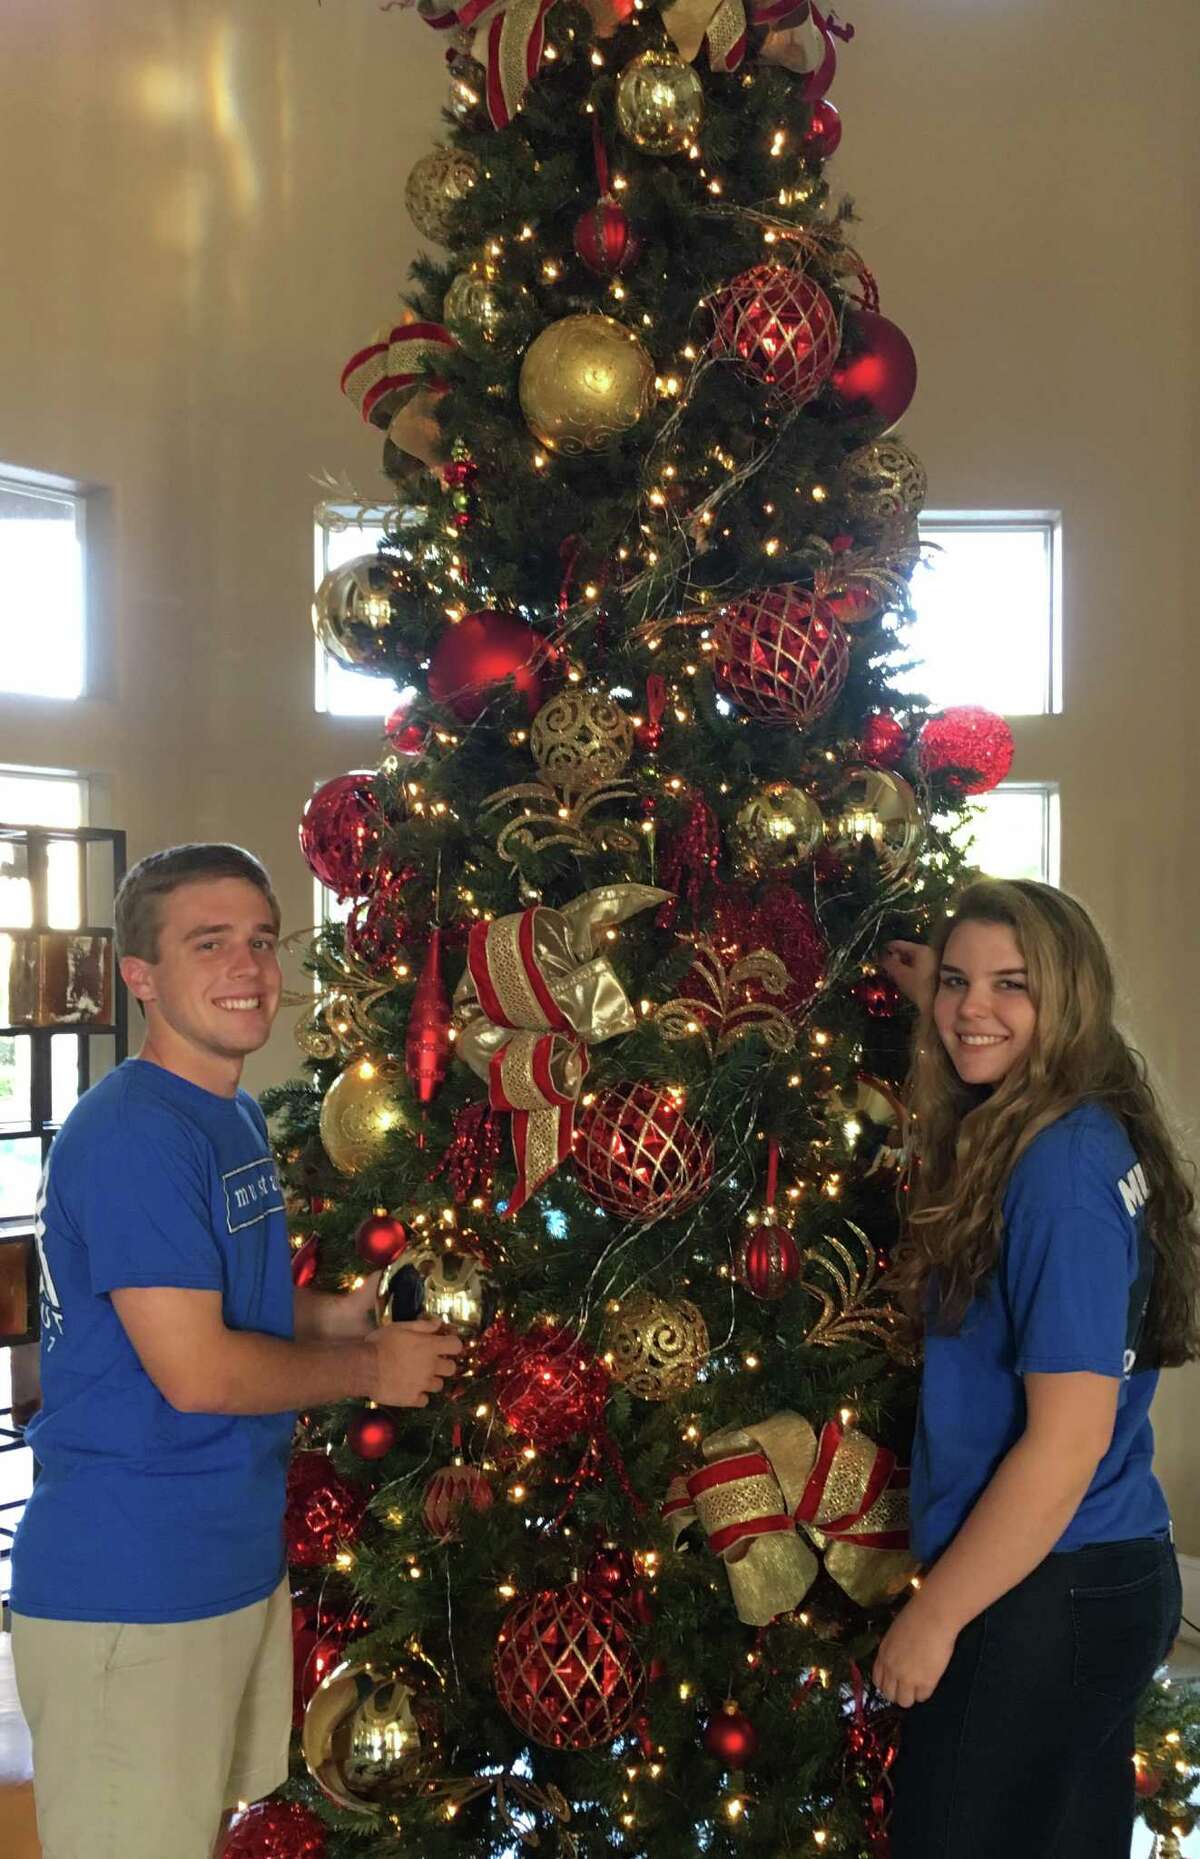 Taylor High seniors Alex Stokes and Keely McNichol are participating in the Dec. 8-9 Holiday Home Tour to benefit Taylor High Project Grad.Taylor High seniors Alex Stokes and Keely McNichol are participating in the Dec. 8-9 Holiday Home Tour to benefit Taylor High Project Grad.